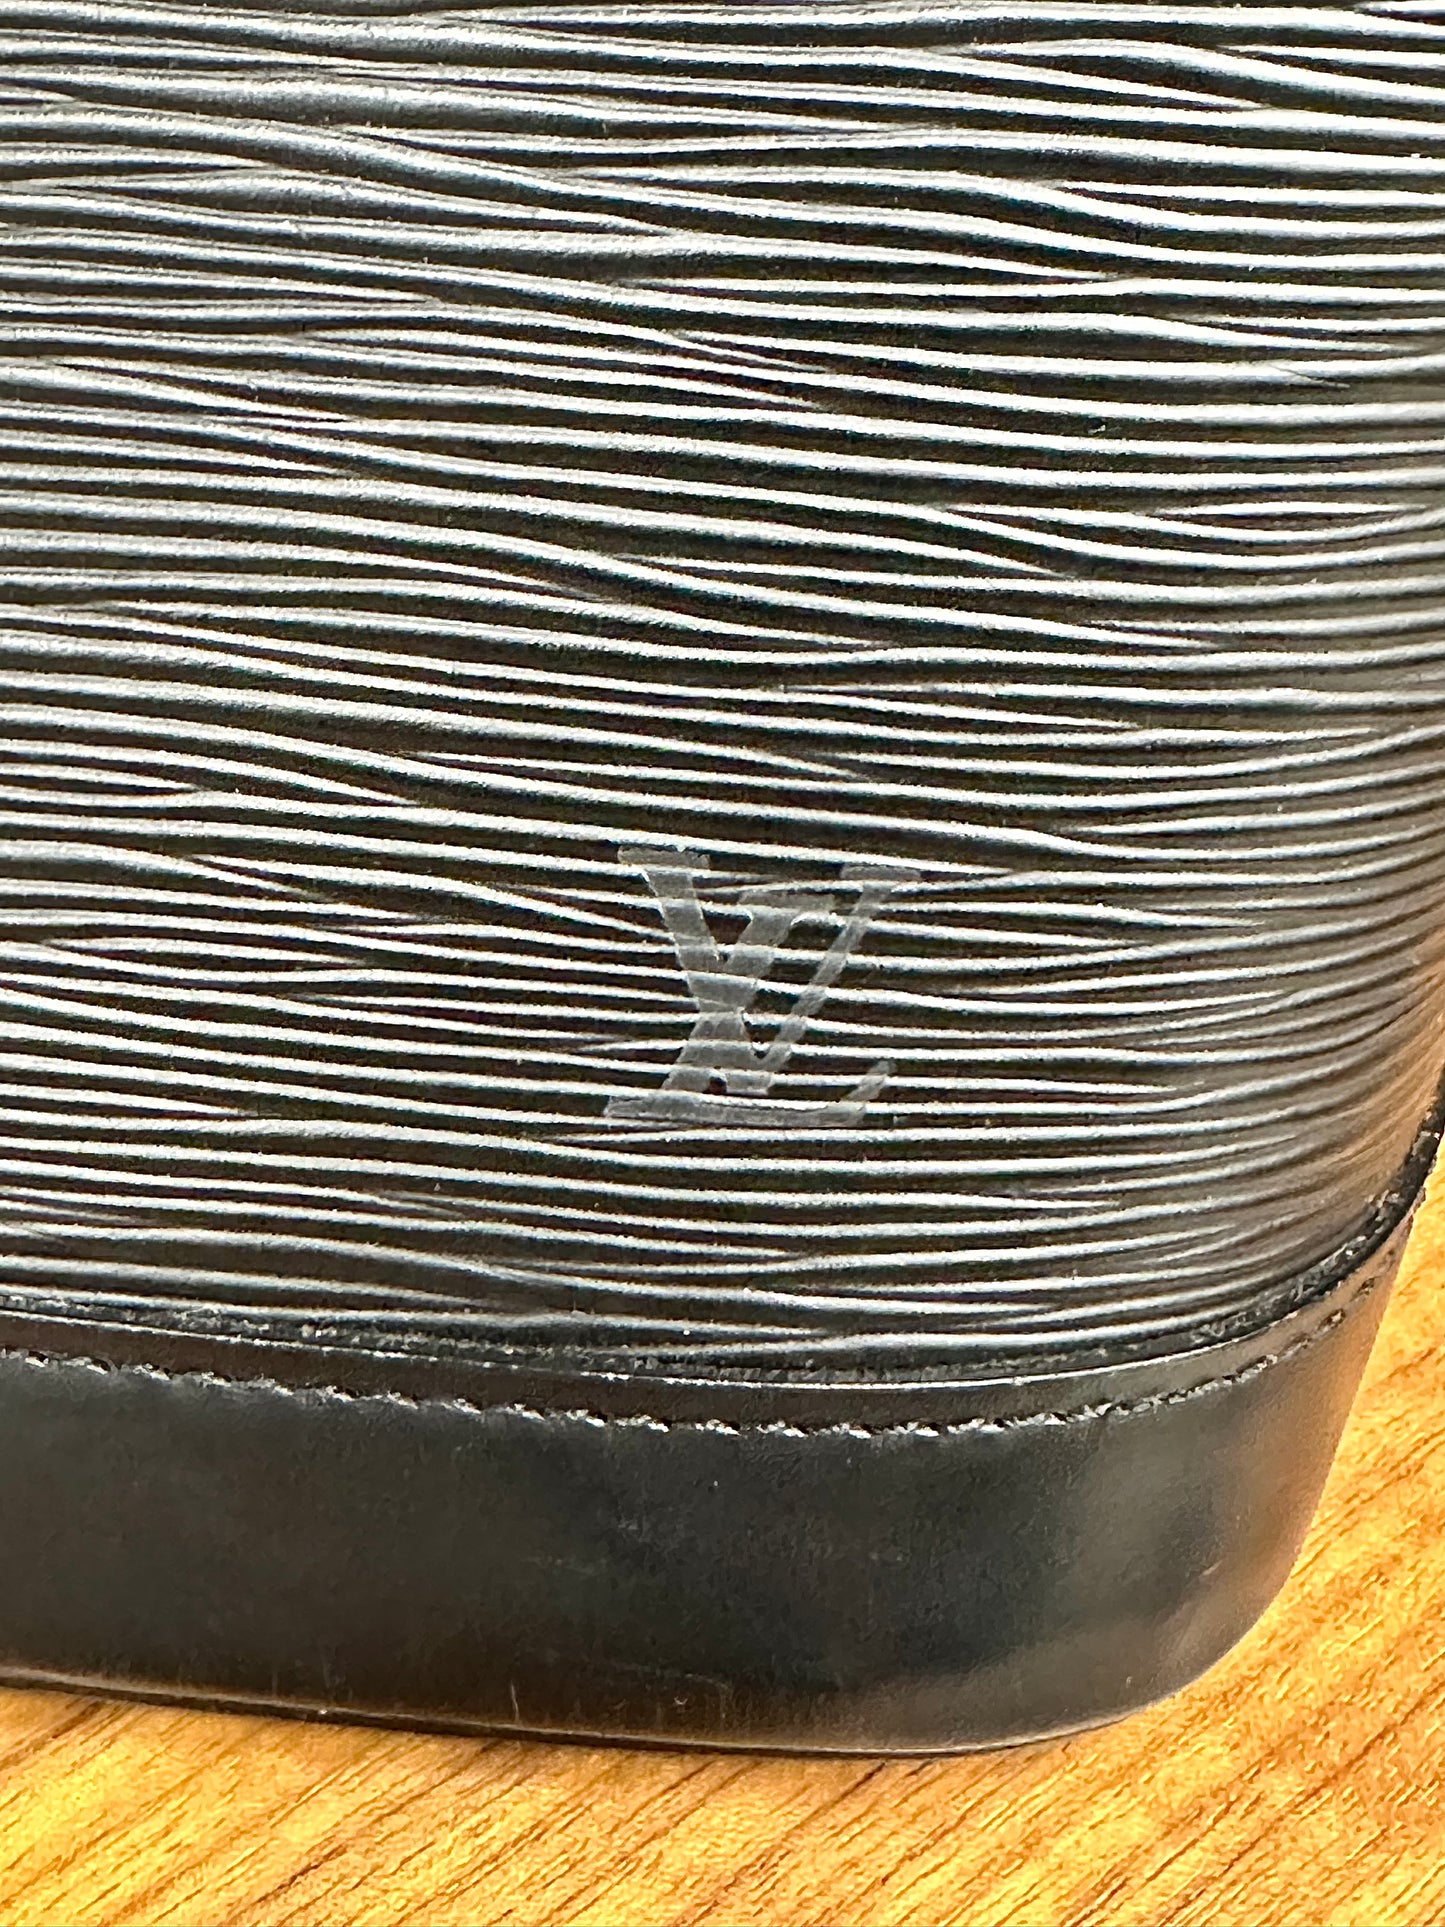 LV logo on corner of bag with scuff marks 